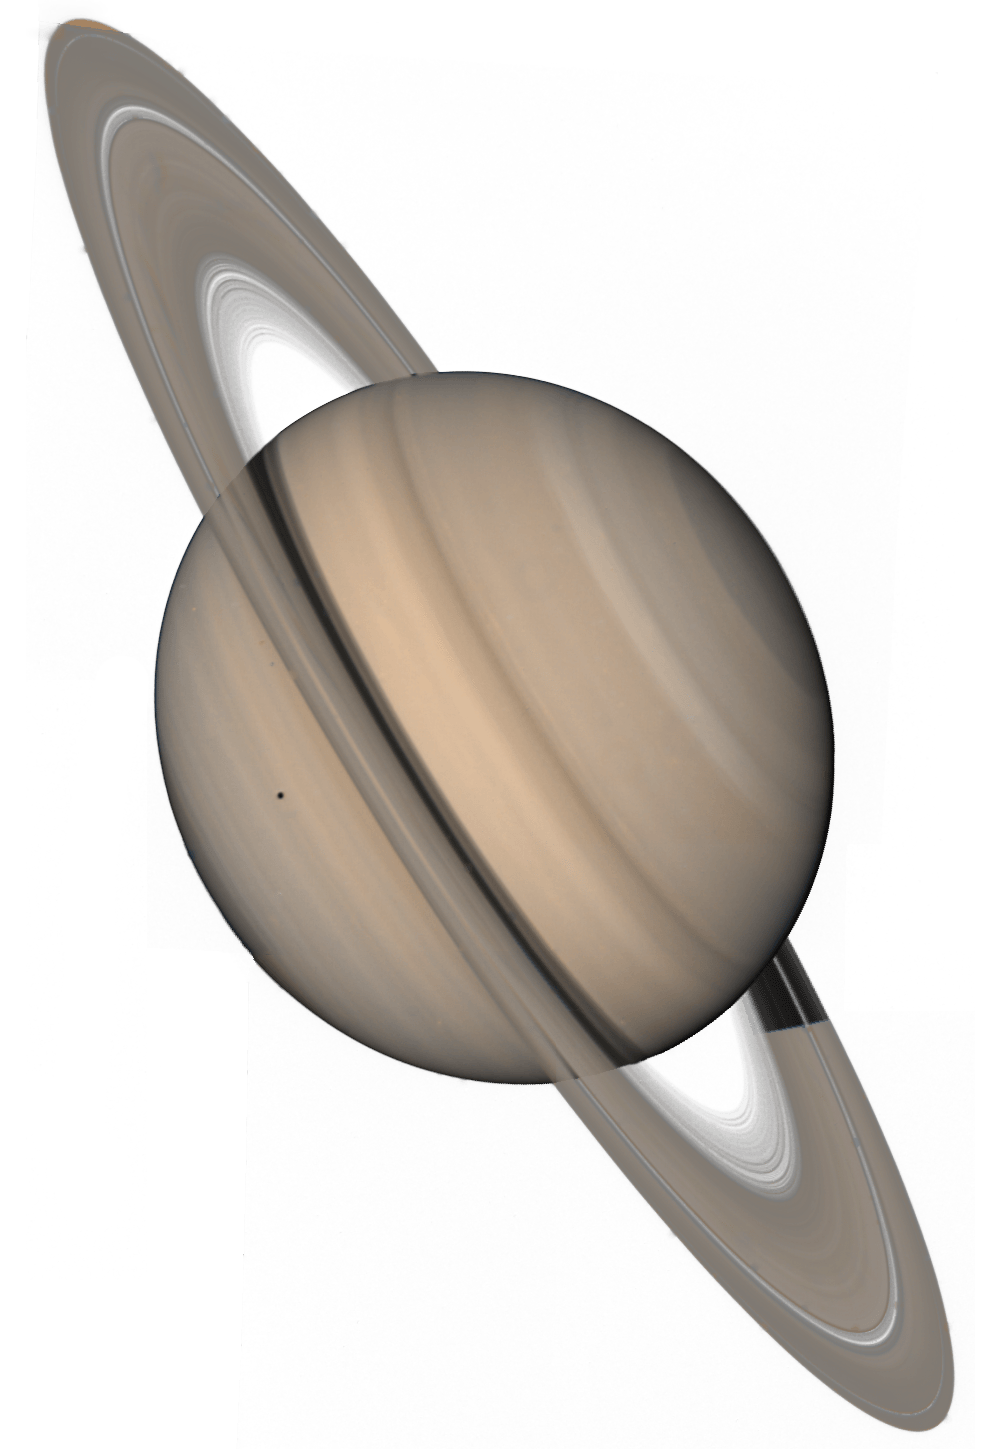 Planet Saturn associated with the numerology of 8